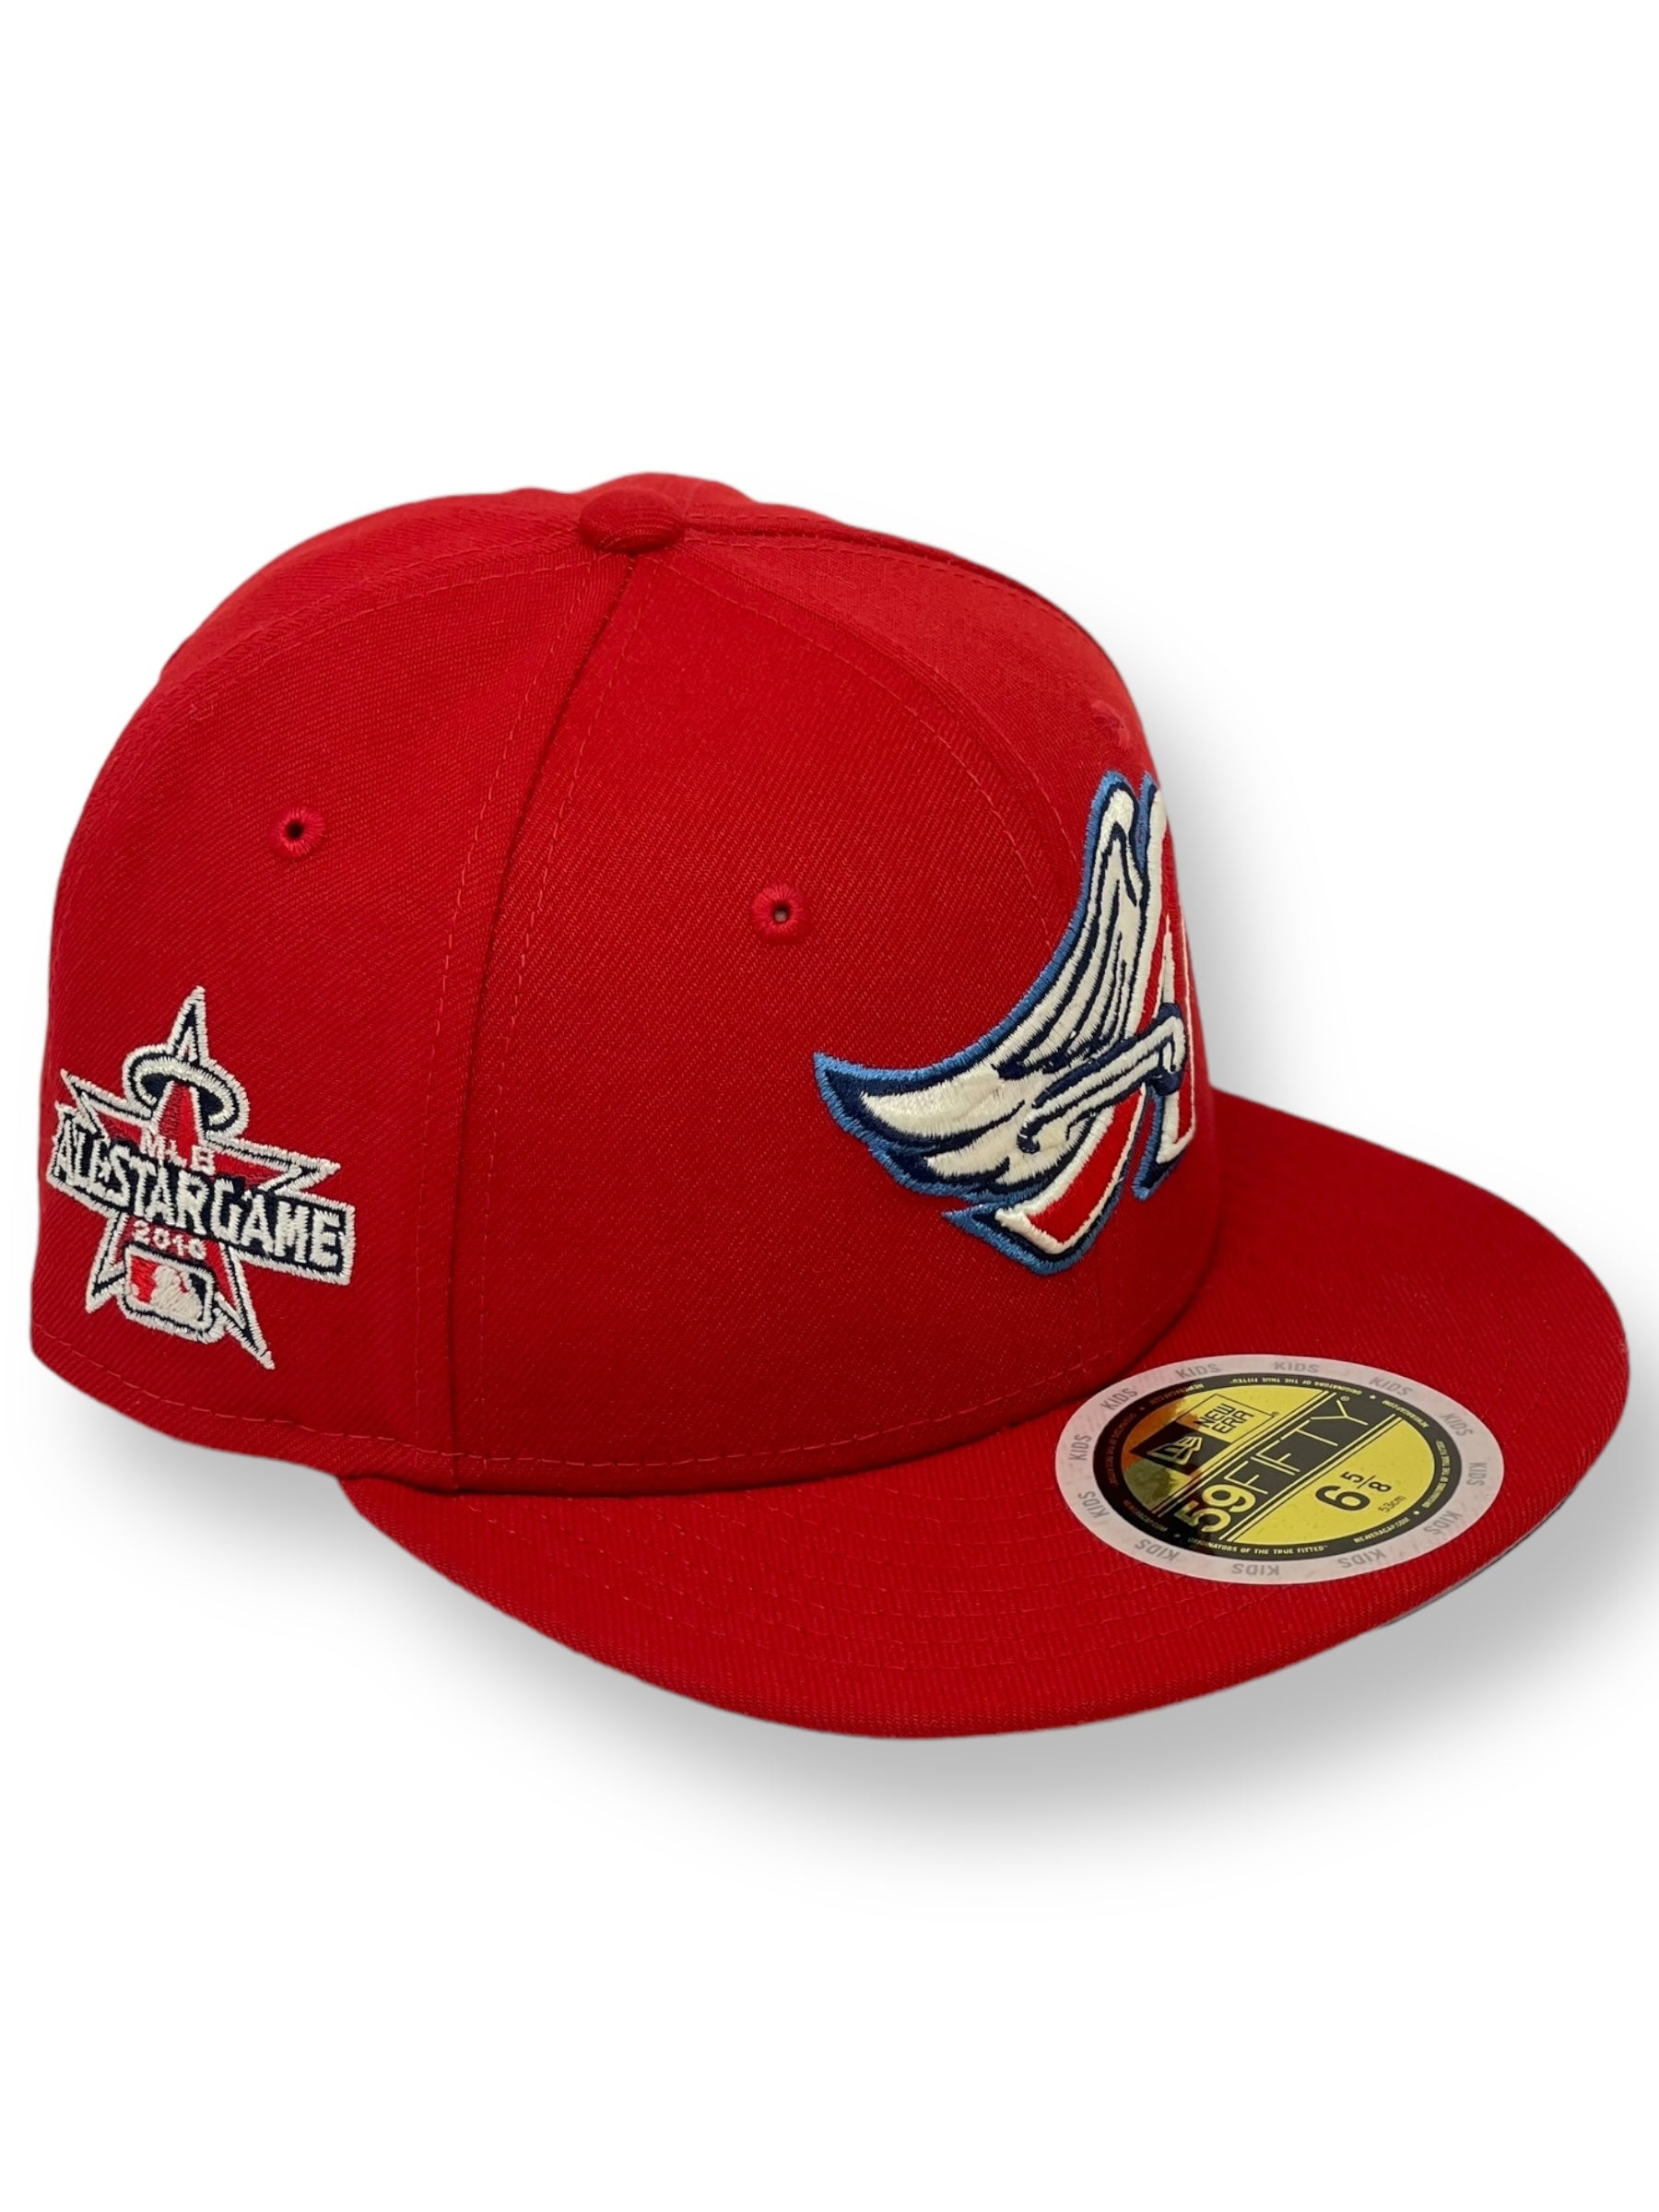 "KIDS" ANAHIEM ANGELS (RED)( 2010 ASG) NEW ERA 59FIFTY FITTED